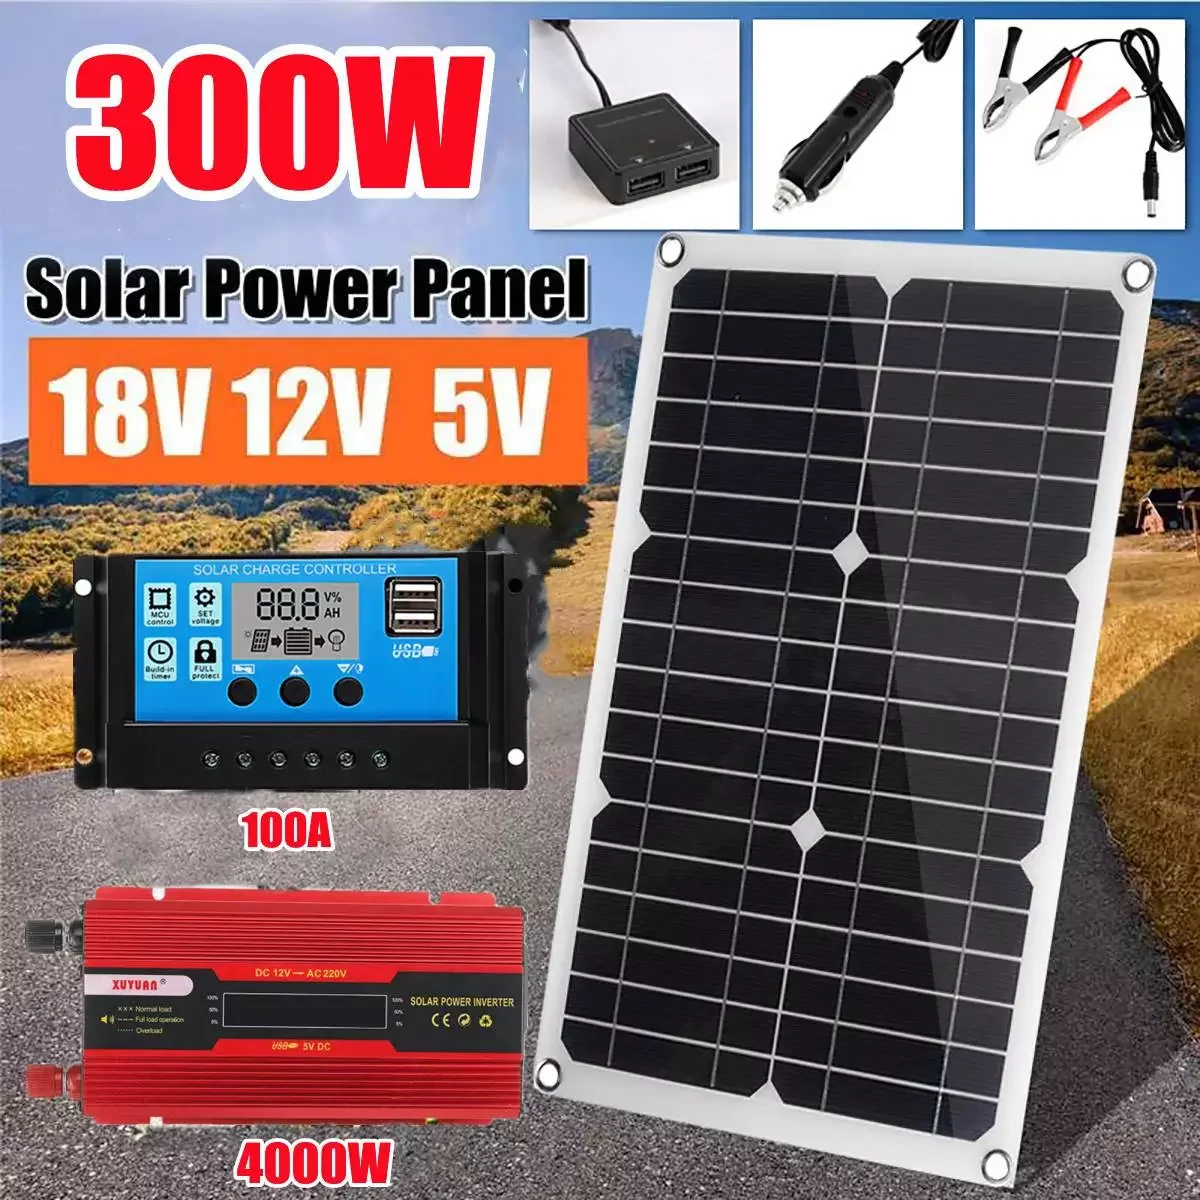 

NEW 4000W Solar Power System 220V/4000W Inverter Kit 300W Solar Panel Battery Charger Complete Controller Home Grid Camp Phone